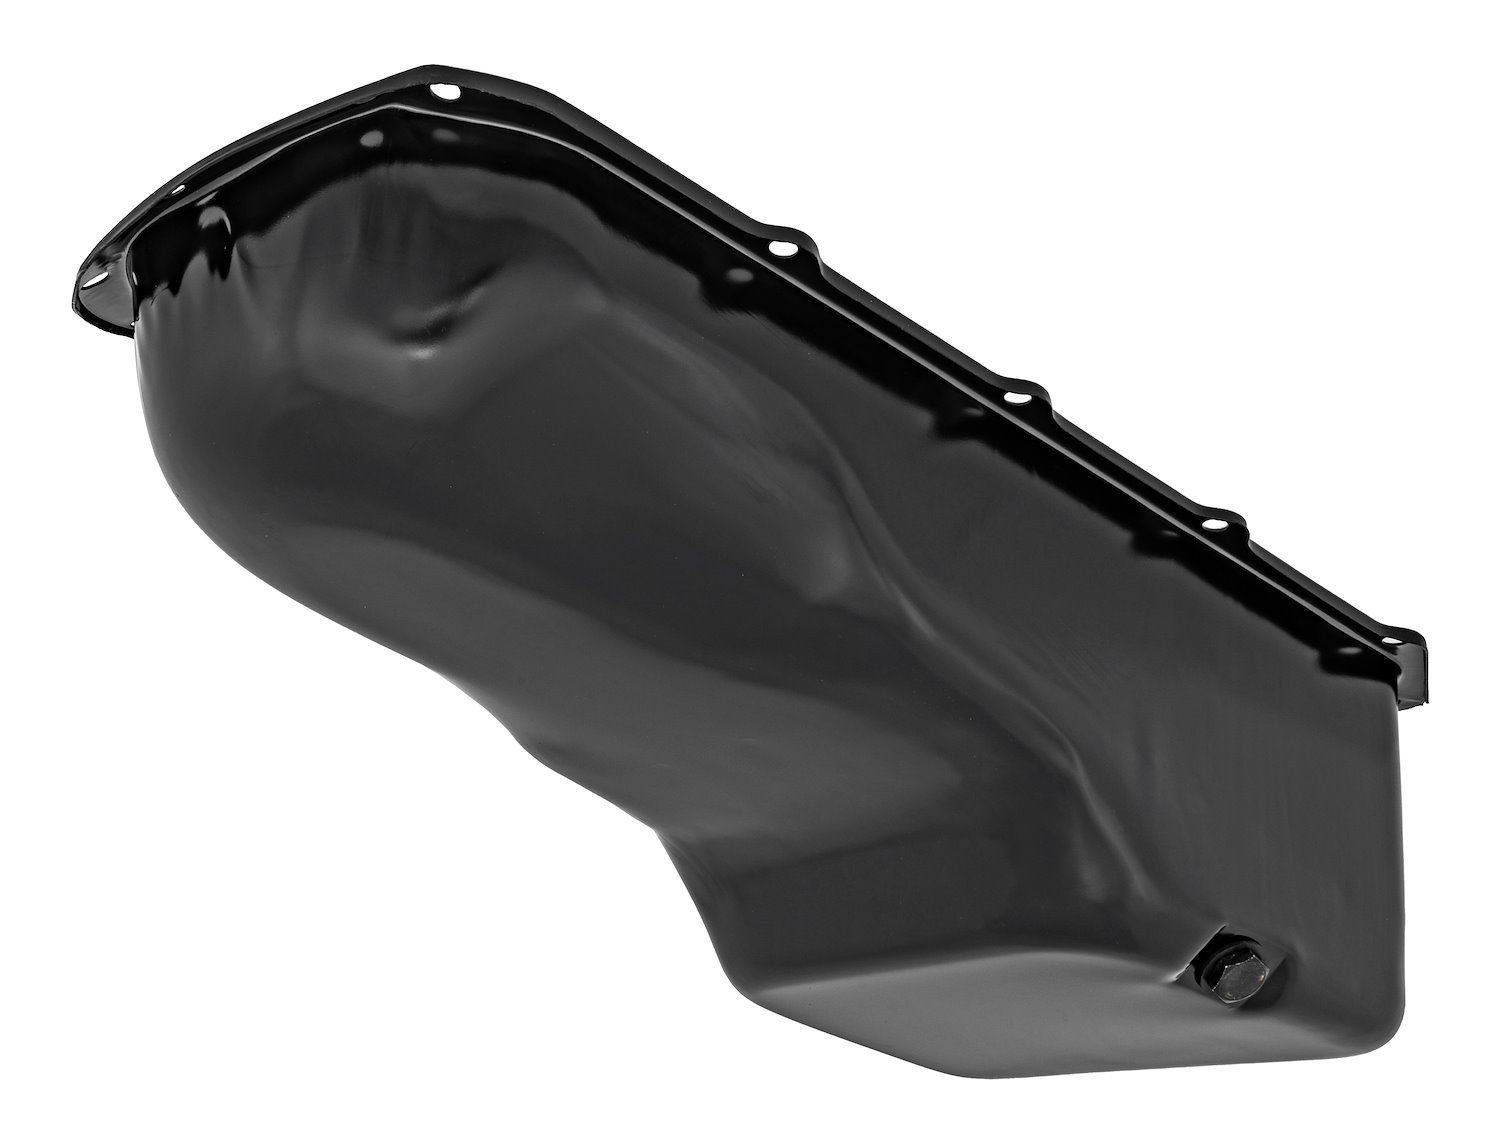 Stock-Style Replacement Oil Pan for 1959-1981 Pontiac 265-455 V8 [Black]